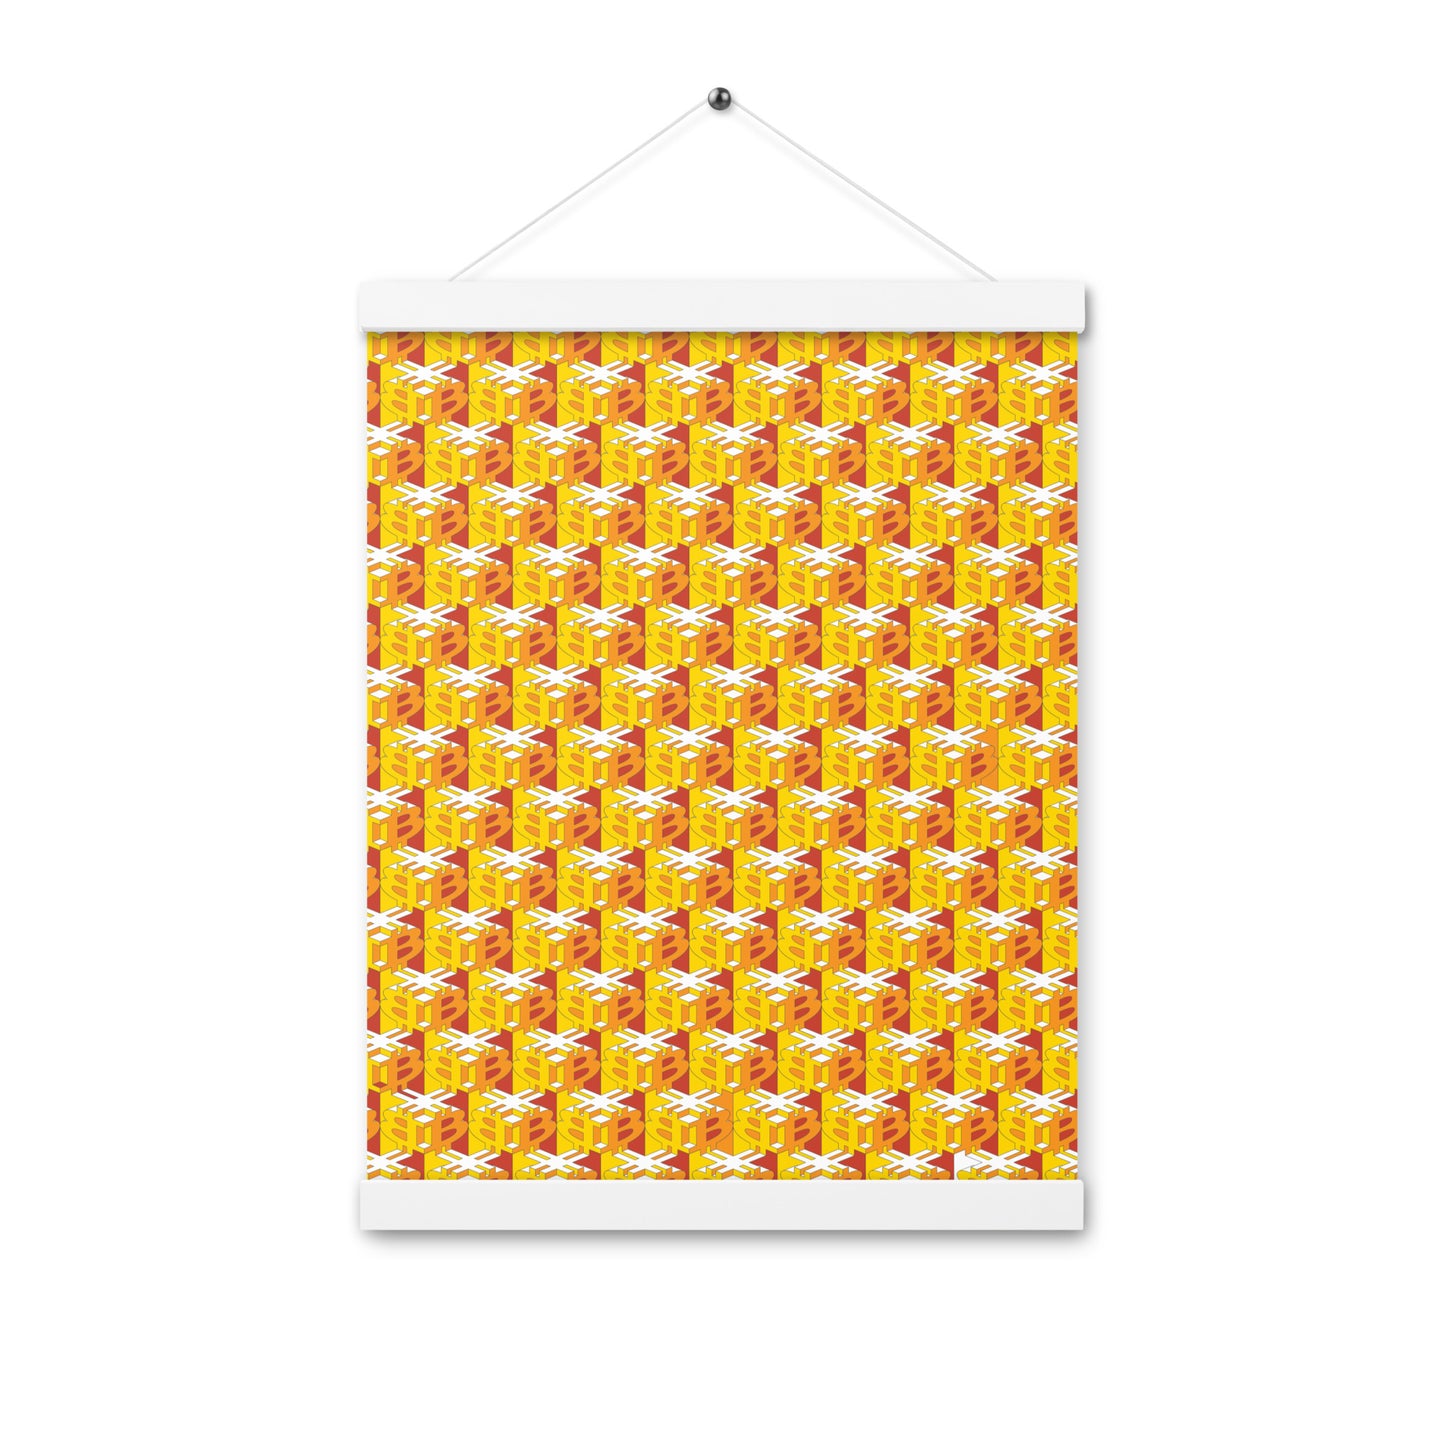 Bitcoin Dice Lattice (Red) Poster with hangers